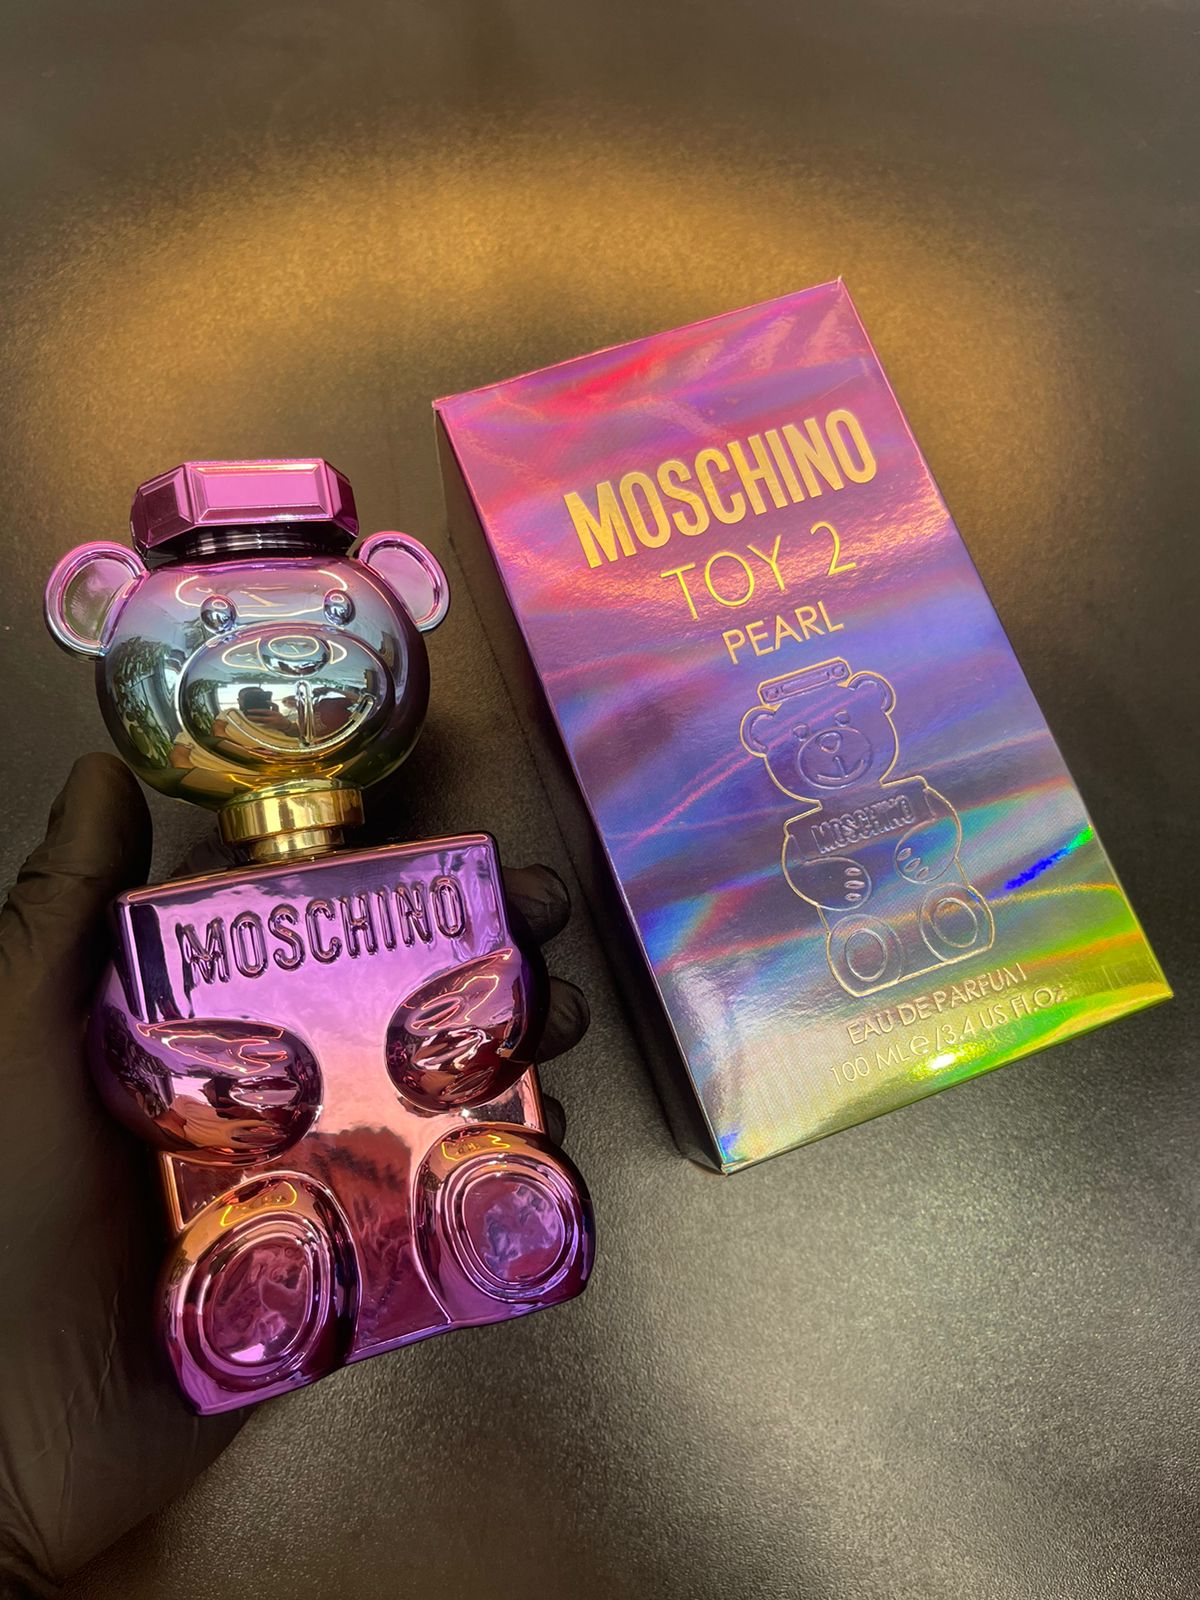 Moschino TOY 2 PEARL